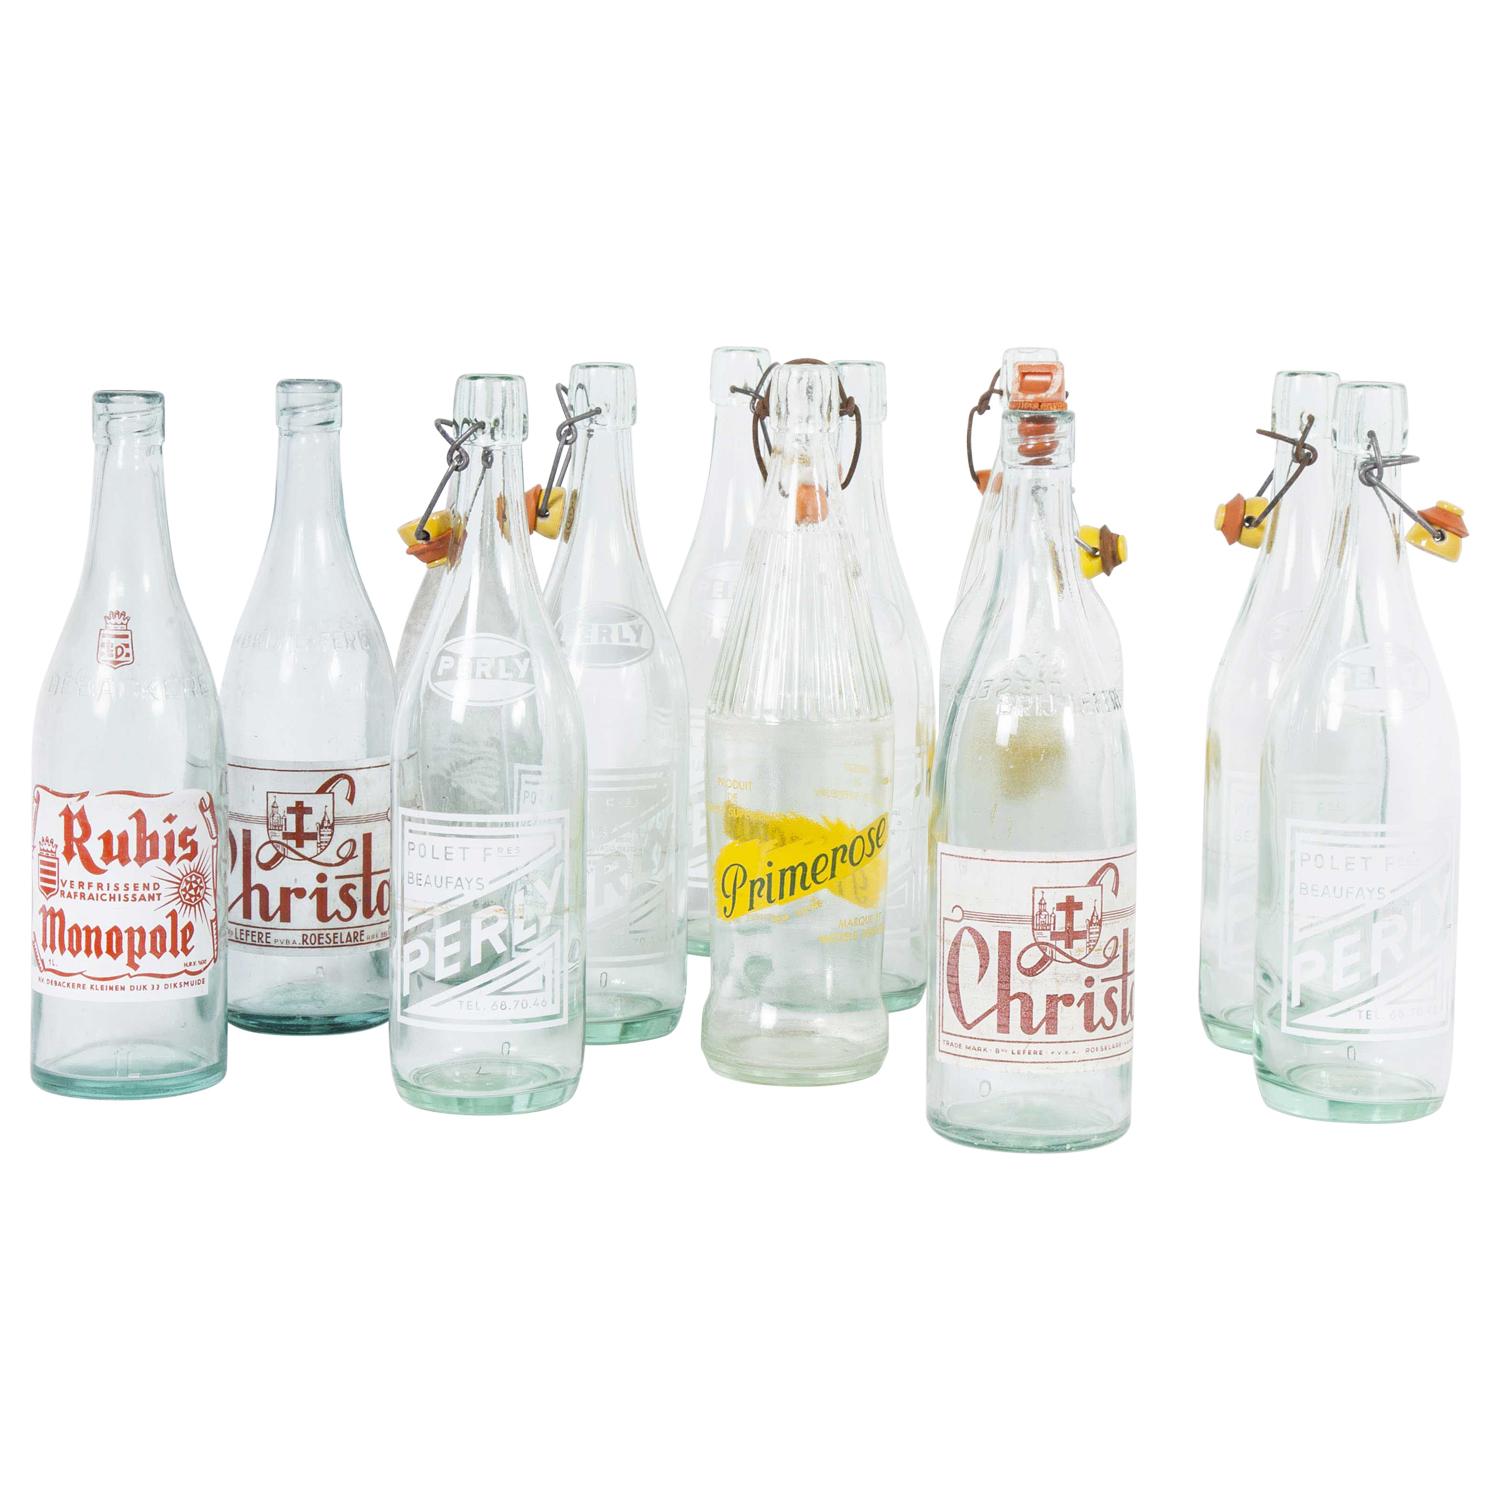 1960s Collection of French Decorative Soda Pop Bottles